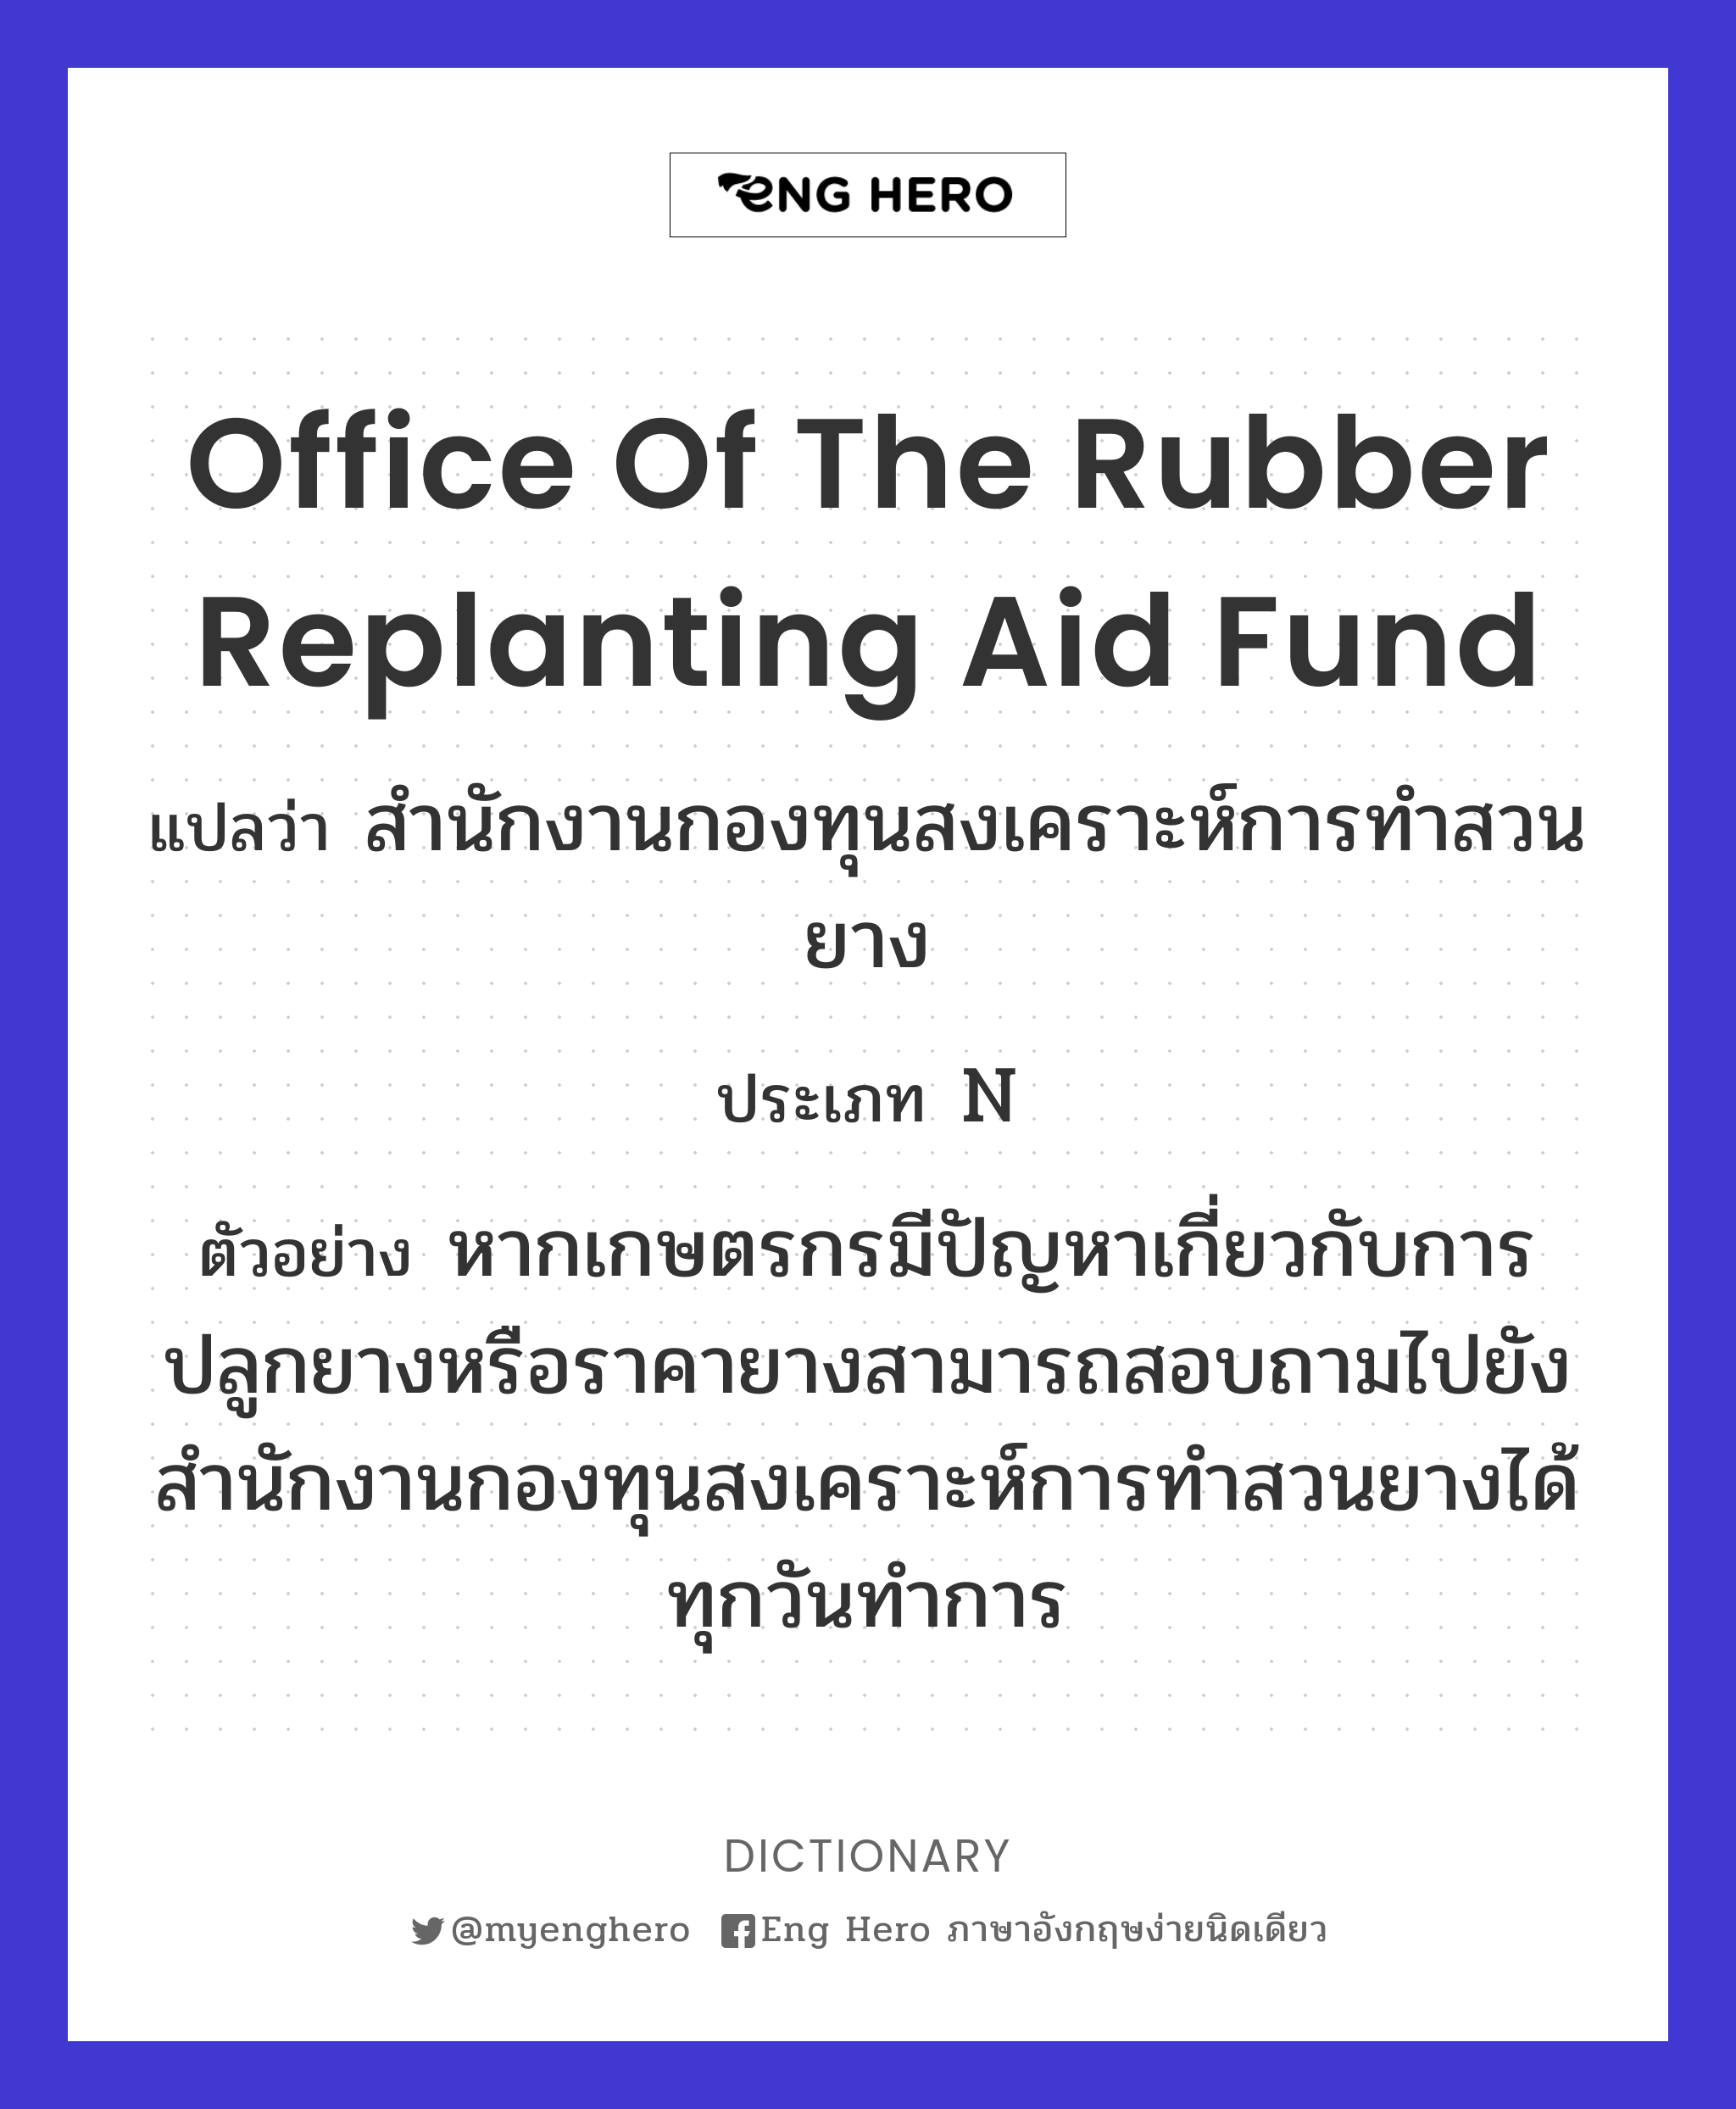 Office of the Rubber Replanting Aid fund